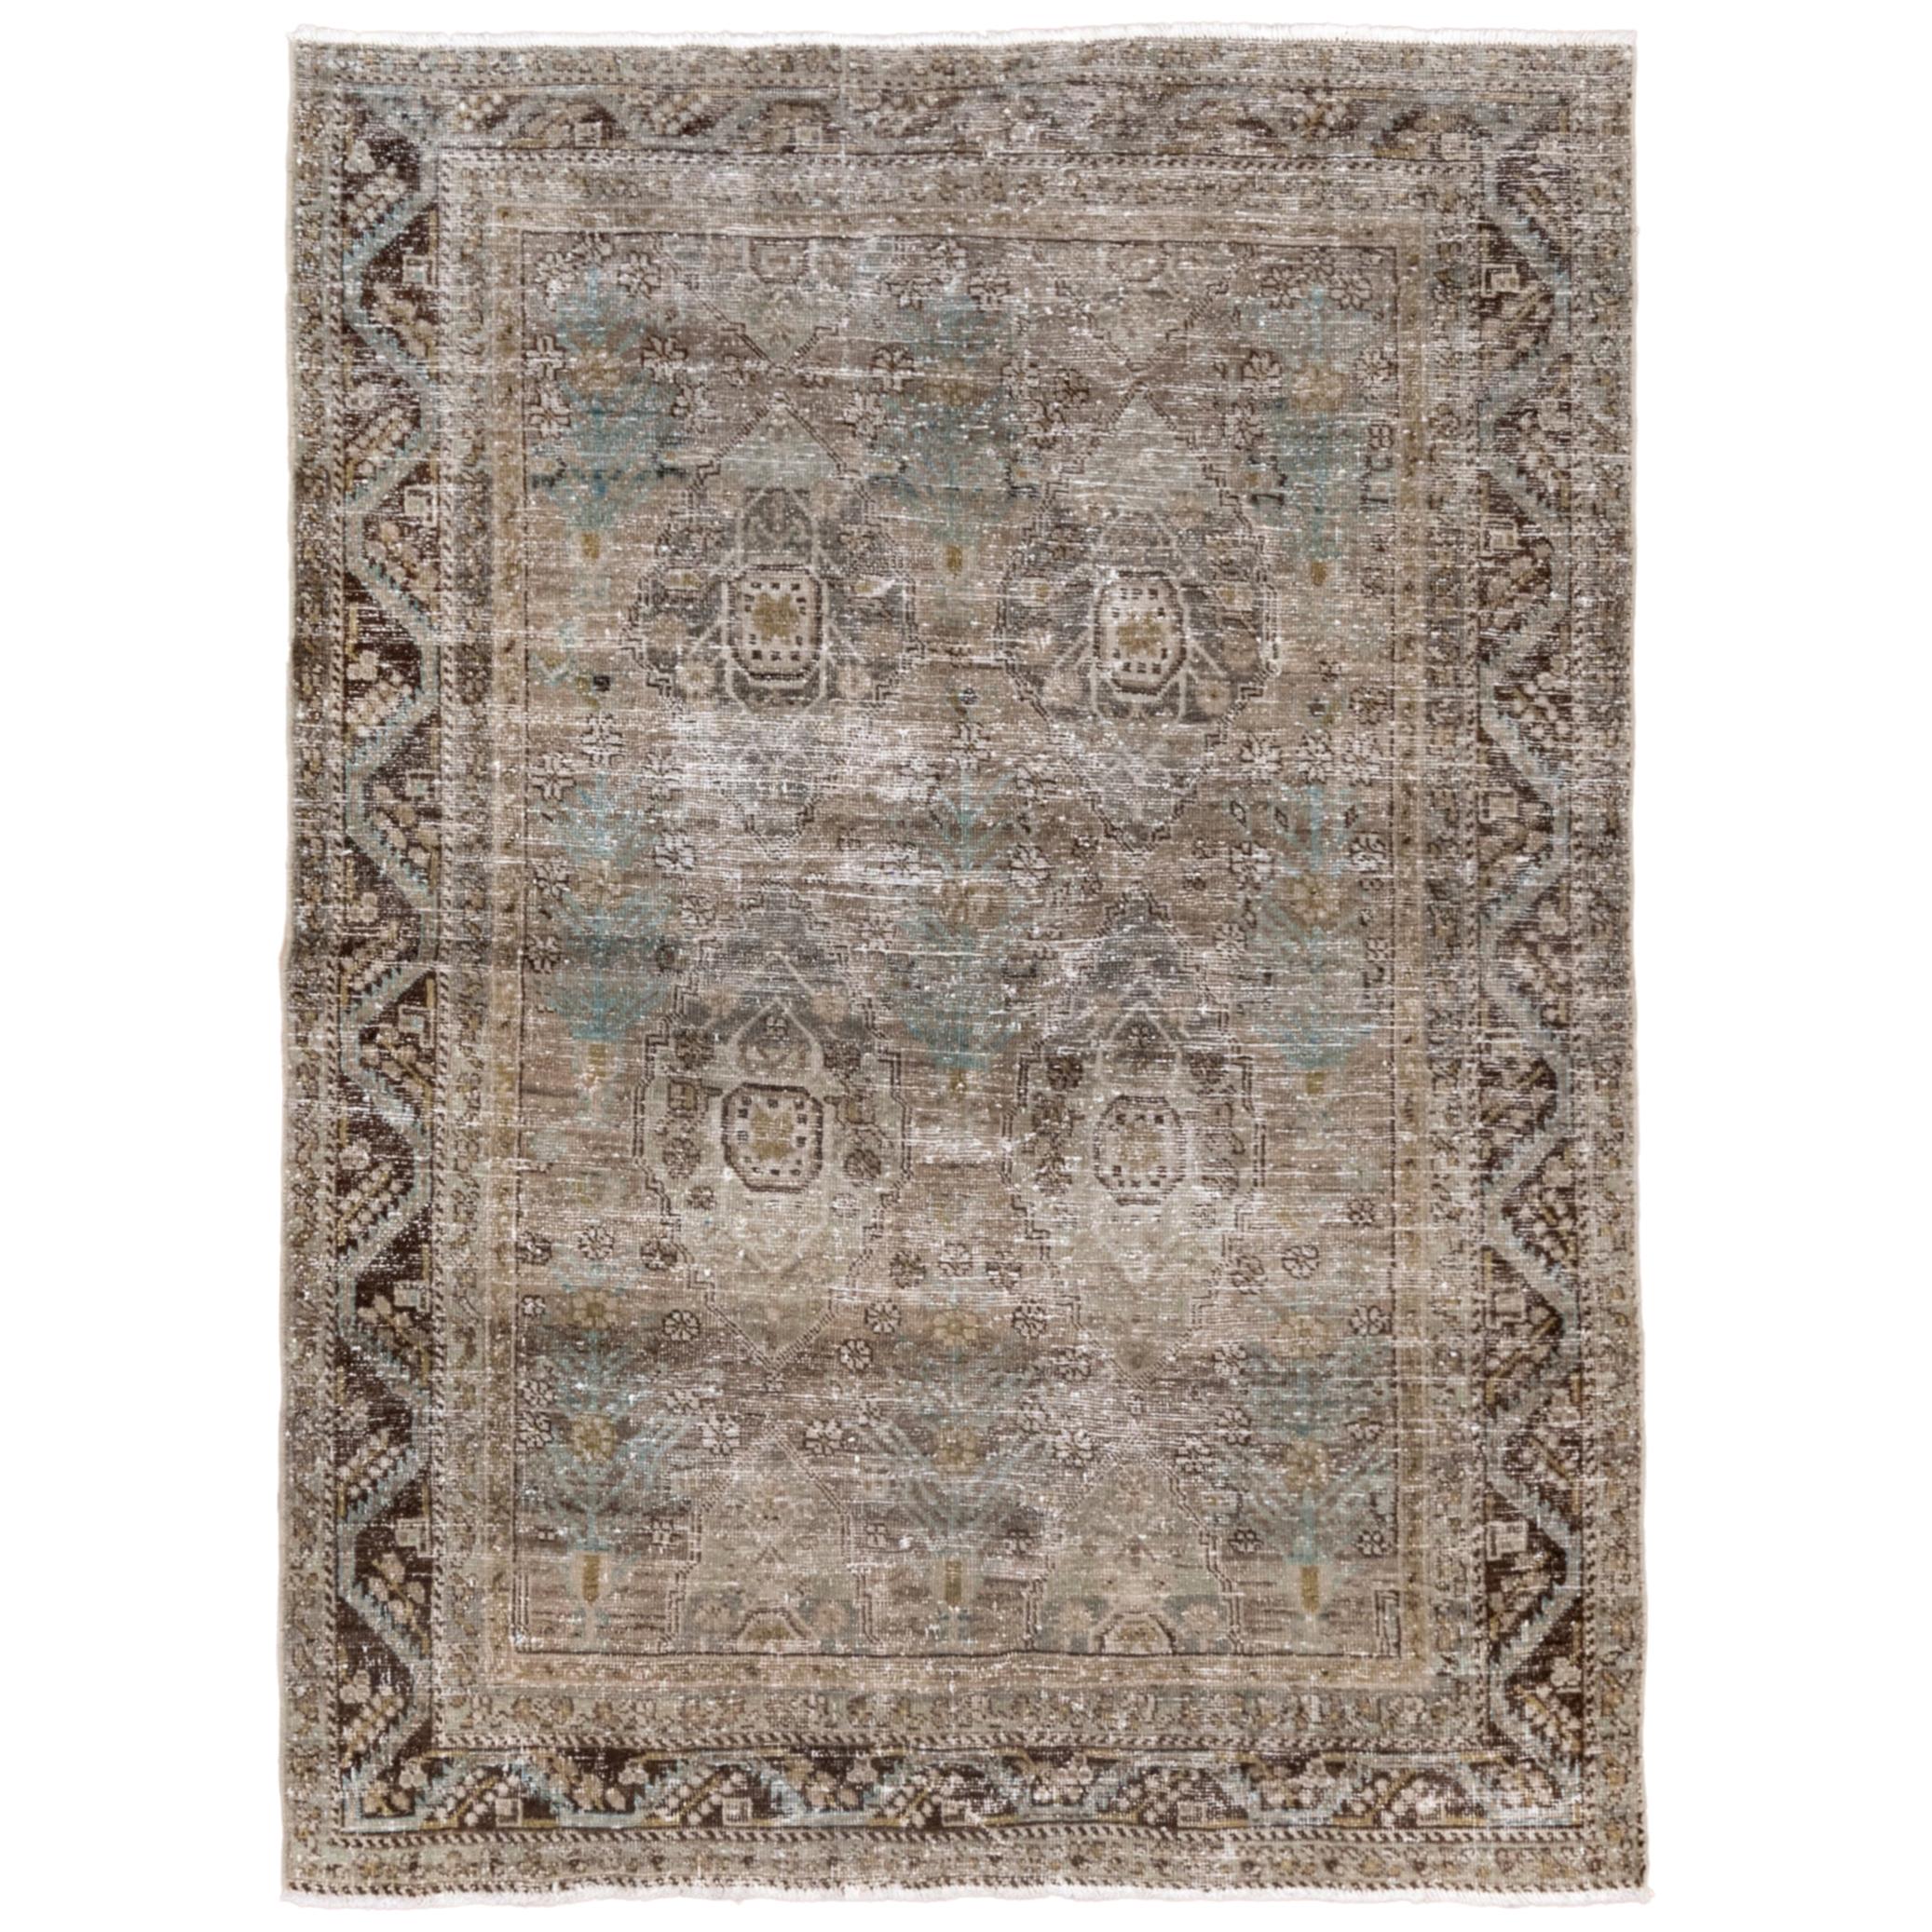 1920s Distressed Antique Turkish Sivas Rug, Earth Tones, Light Blue Accents For Sale